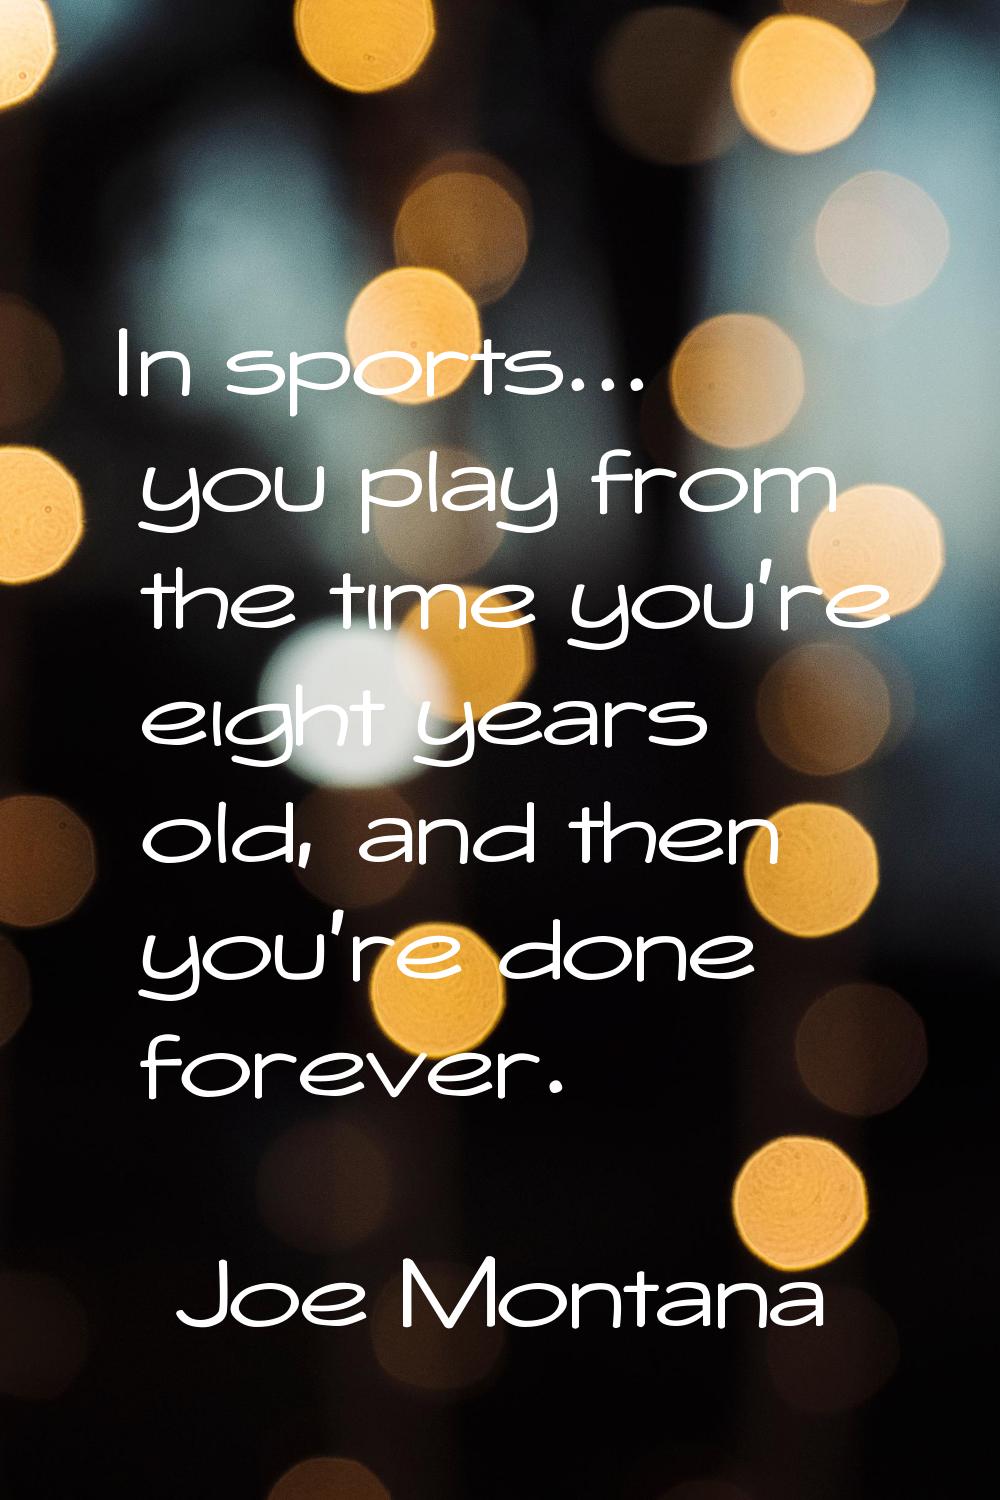 In sports... you play from the time you're eight years old, and then you're done forever.